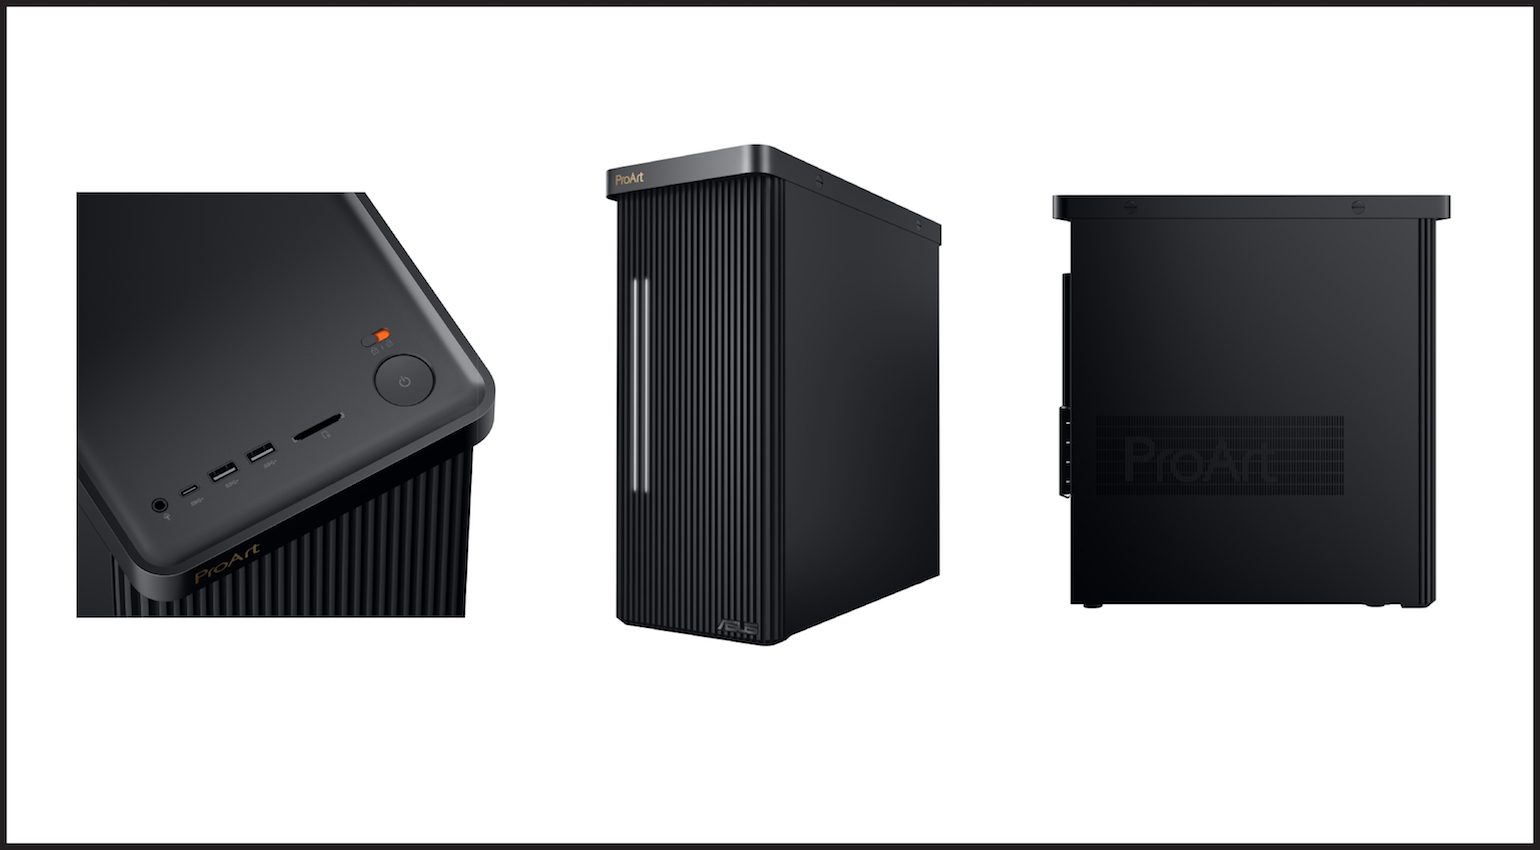 The ProArt Station PD5, a new desktop from ASUS